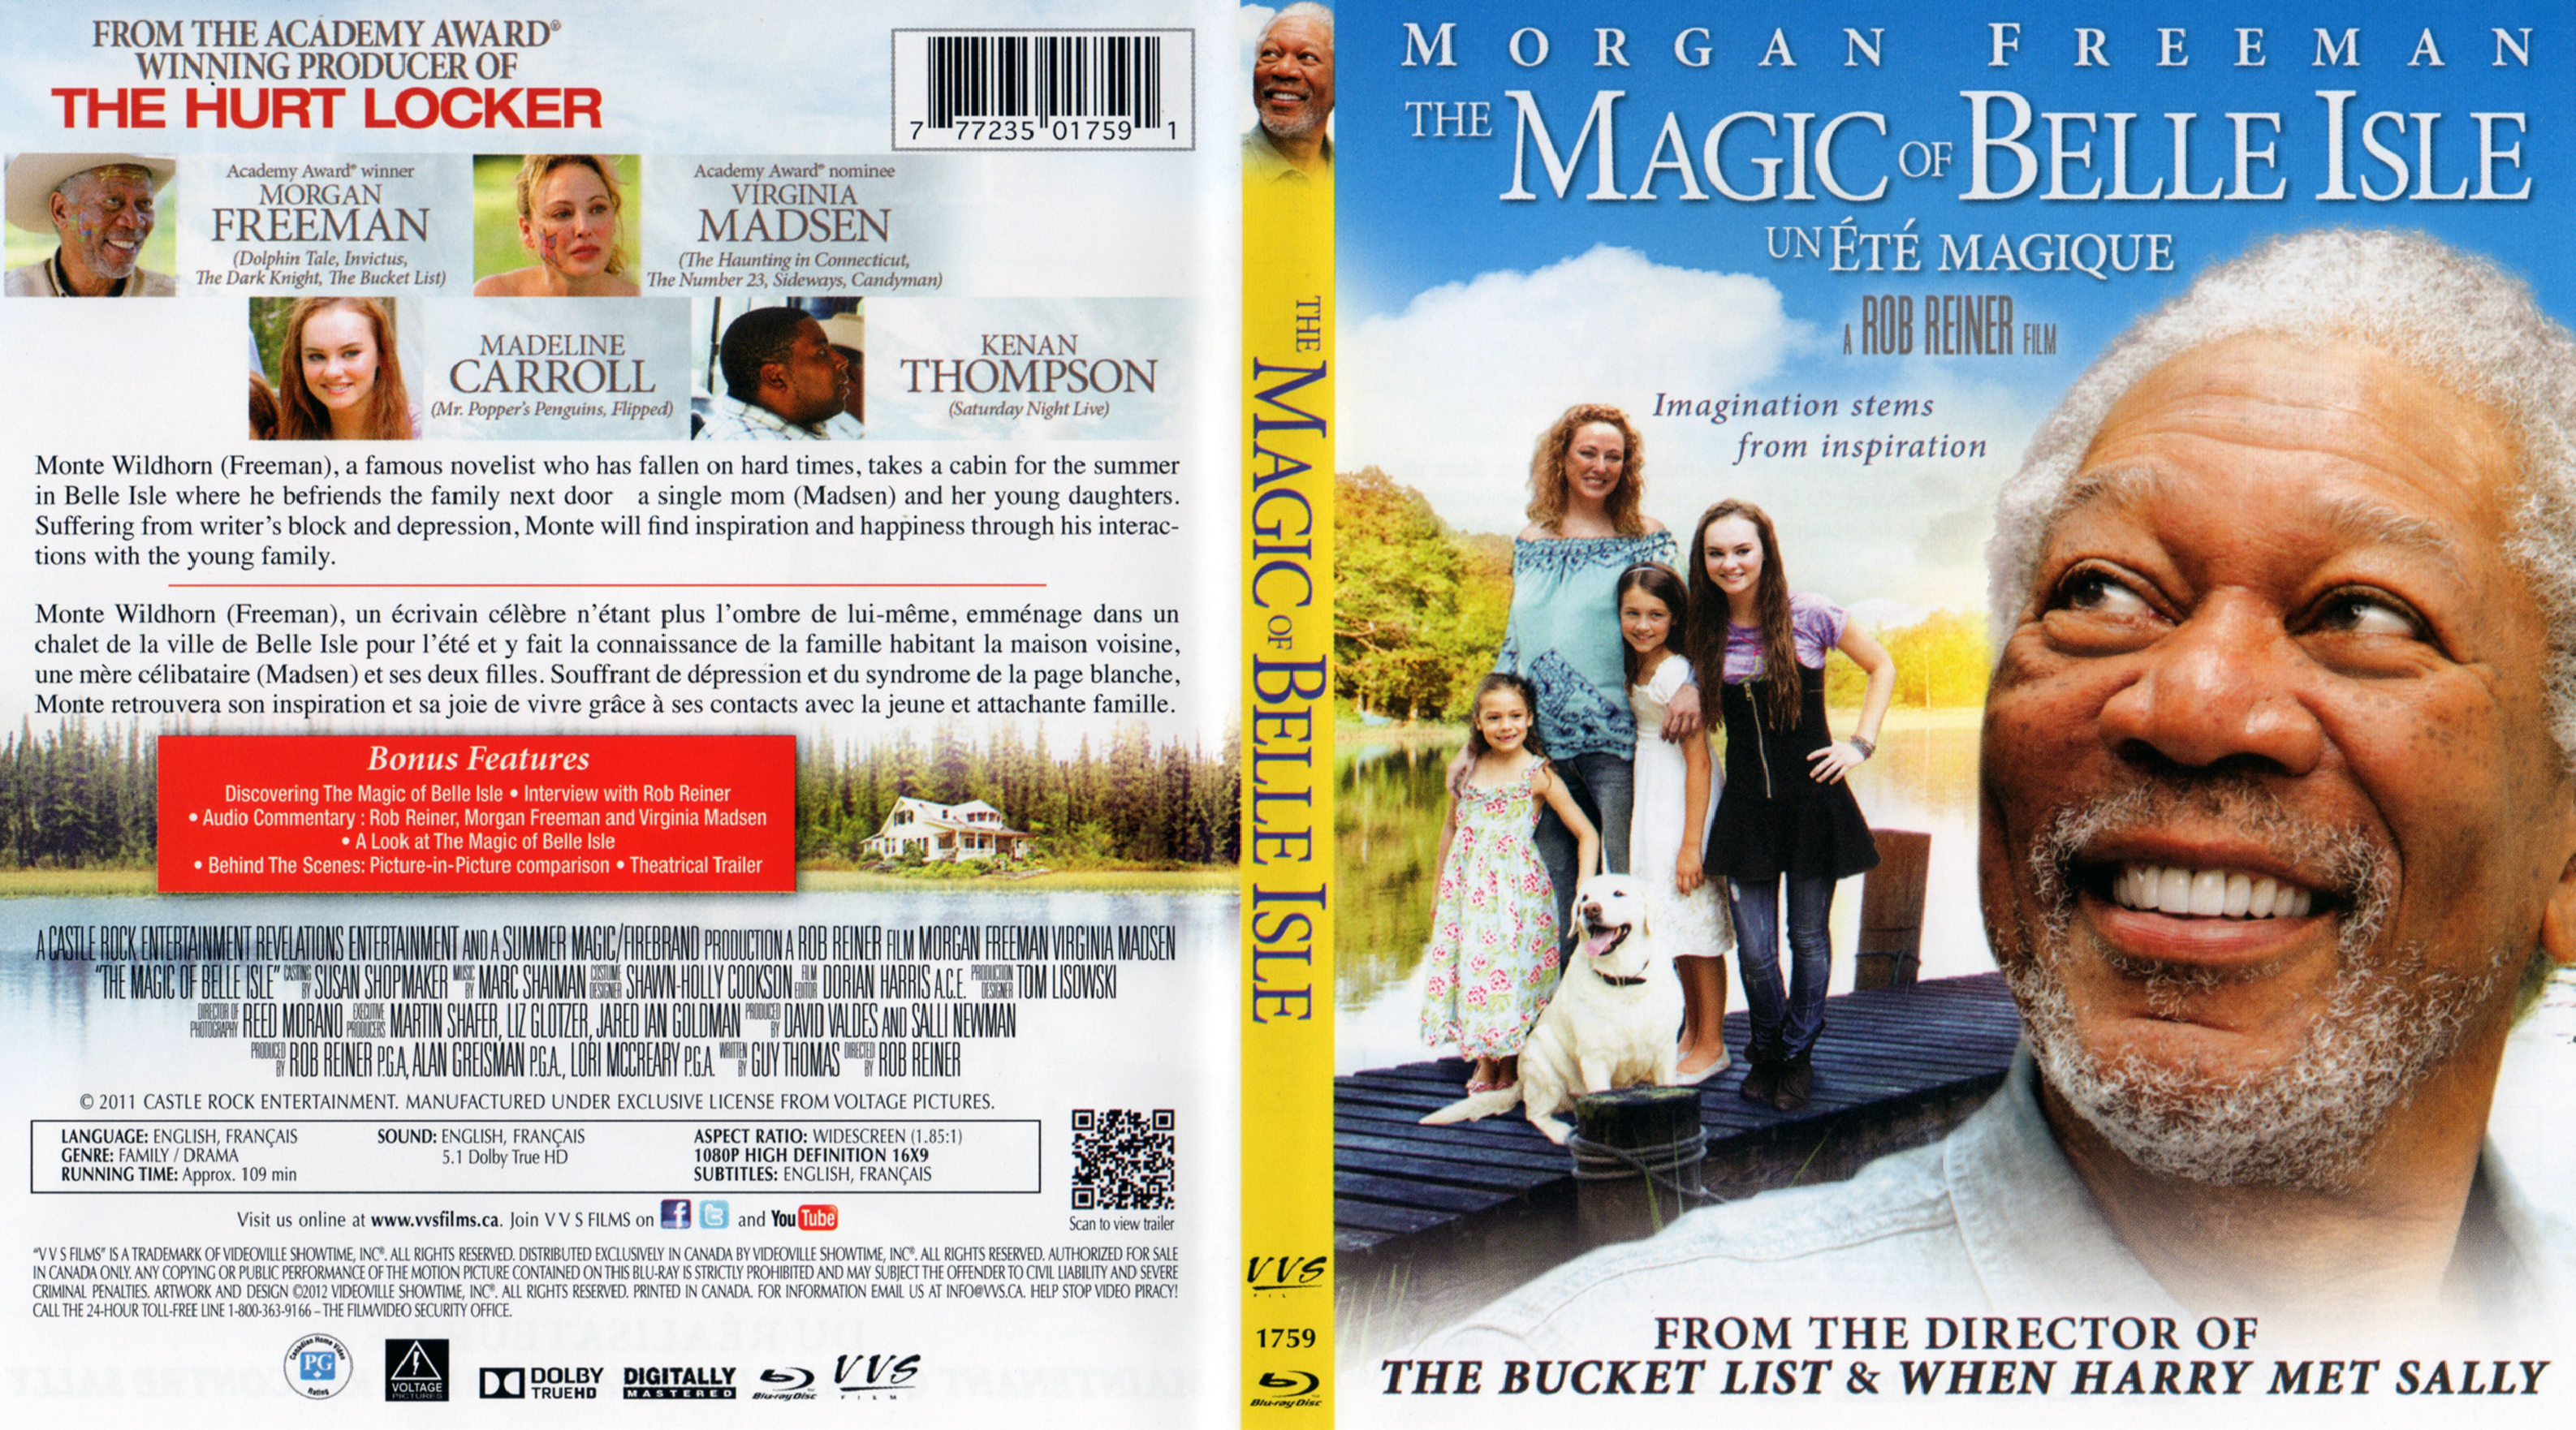 Jaquette DVD The magic of belle isle - Un t magique (Canadienne) (BLU-RAY)